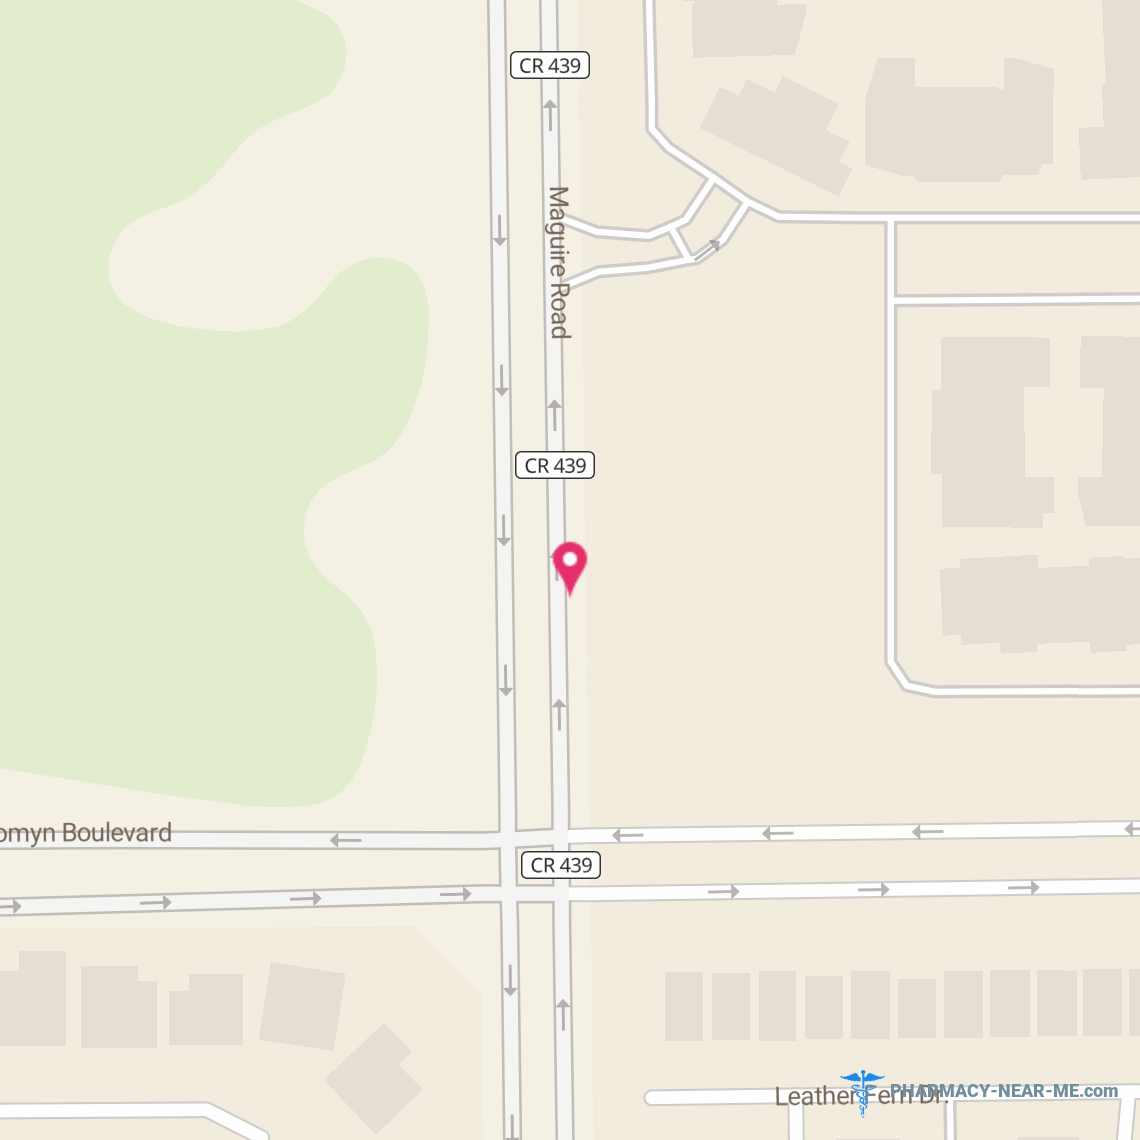 PUBLIX PHARMACY #0542 - Pharmacy Hours, Phone, Reviews & Information: 2600 Maguire Road, Ocoee, Florida 34761, United States